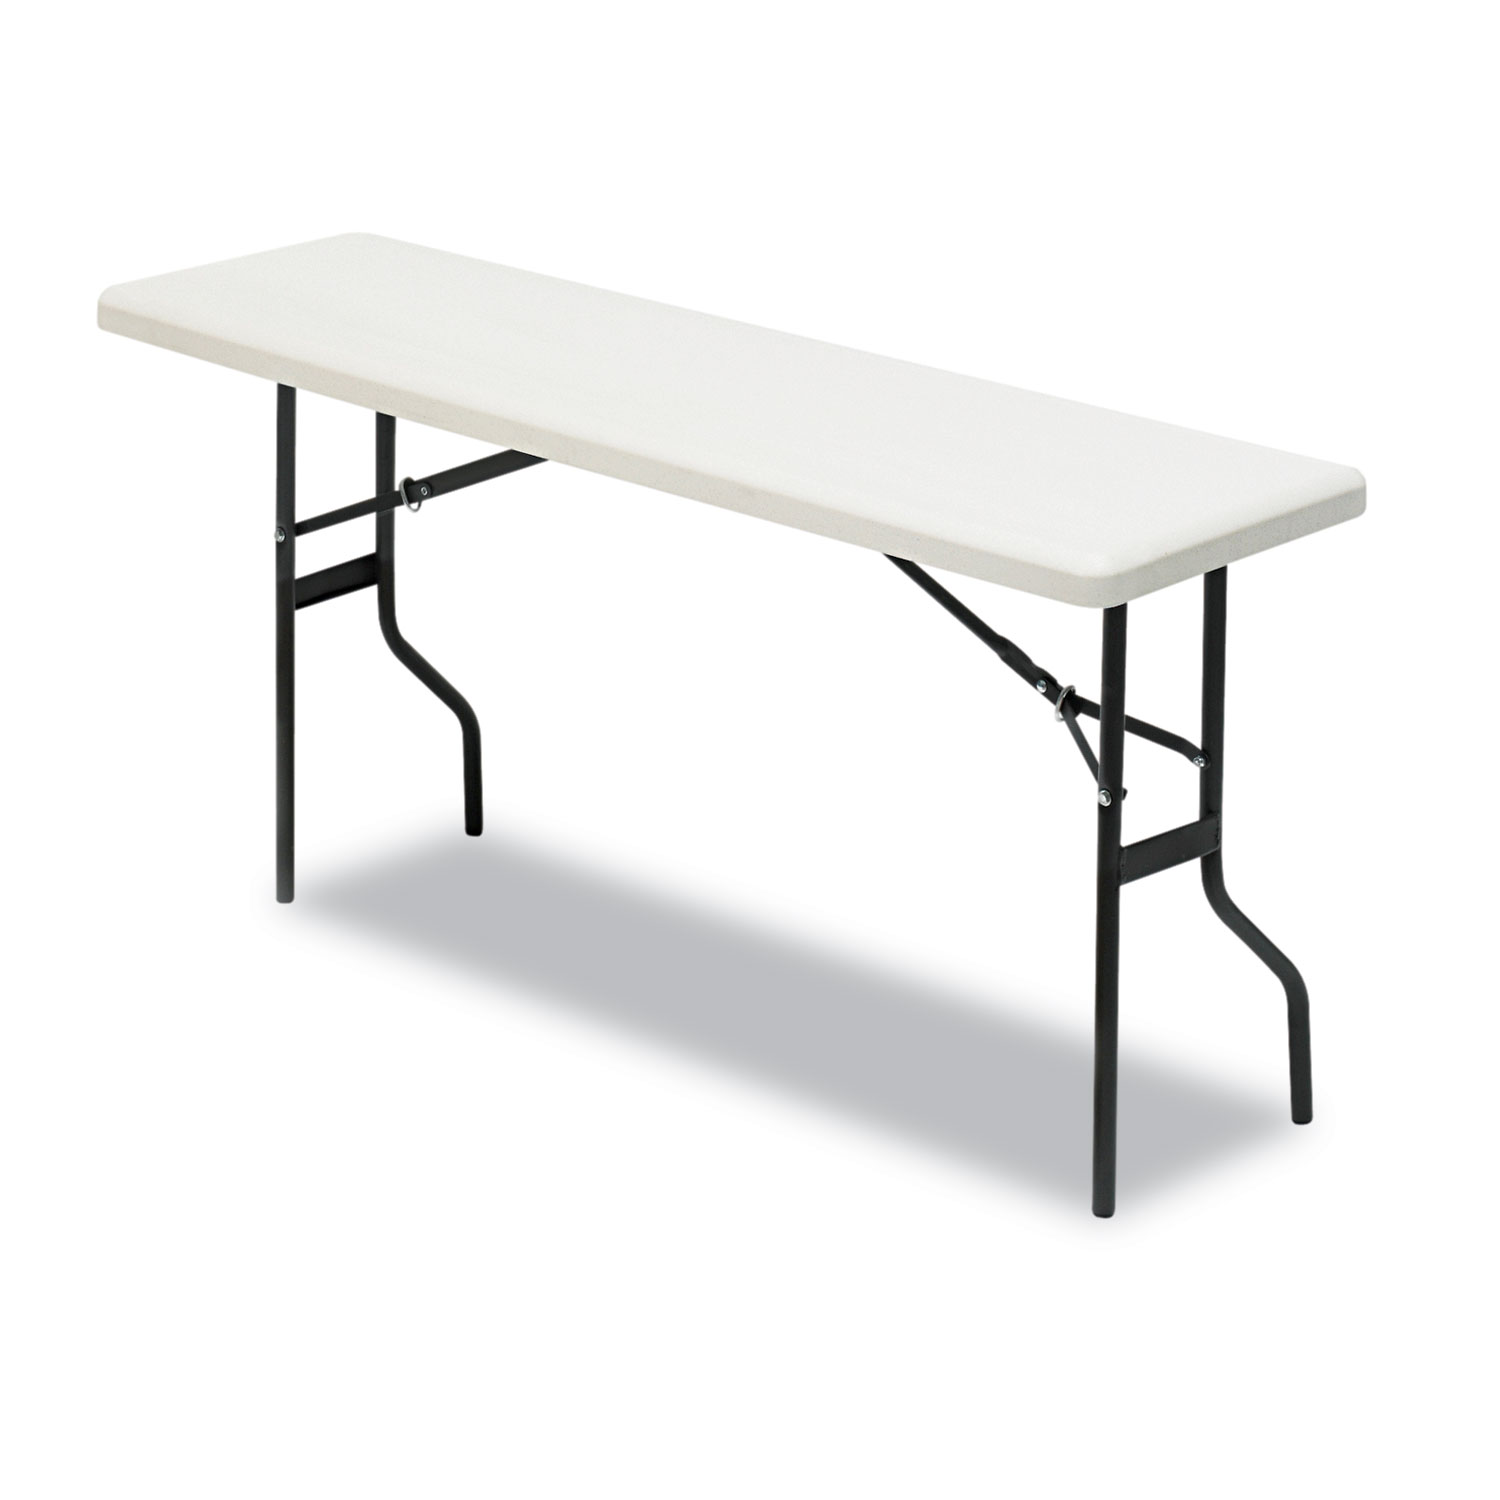  Iceberg 65353 IndestrucTables Too 1200 Series Folding Table, 60w x 18d x 29h, Platinum (ICE65353) 